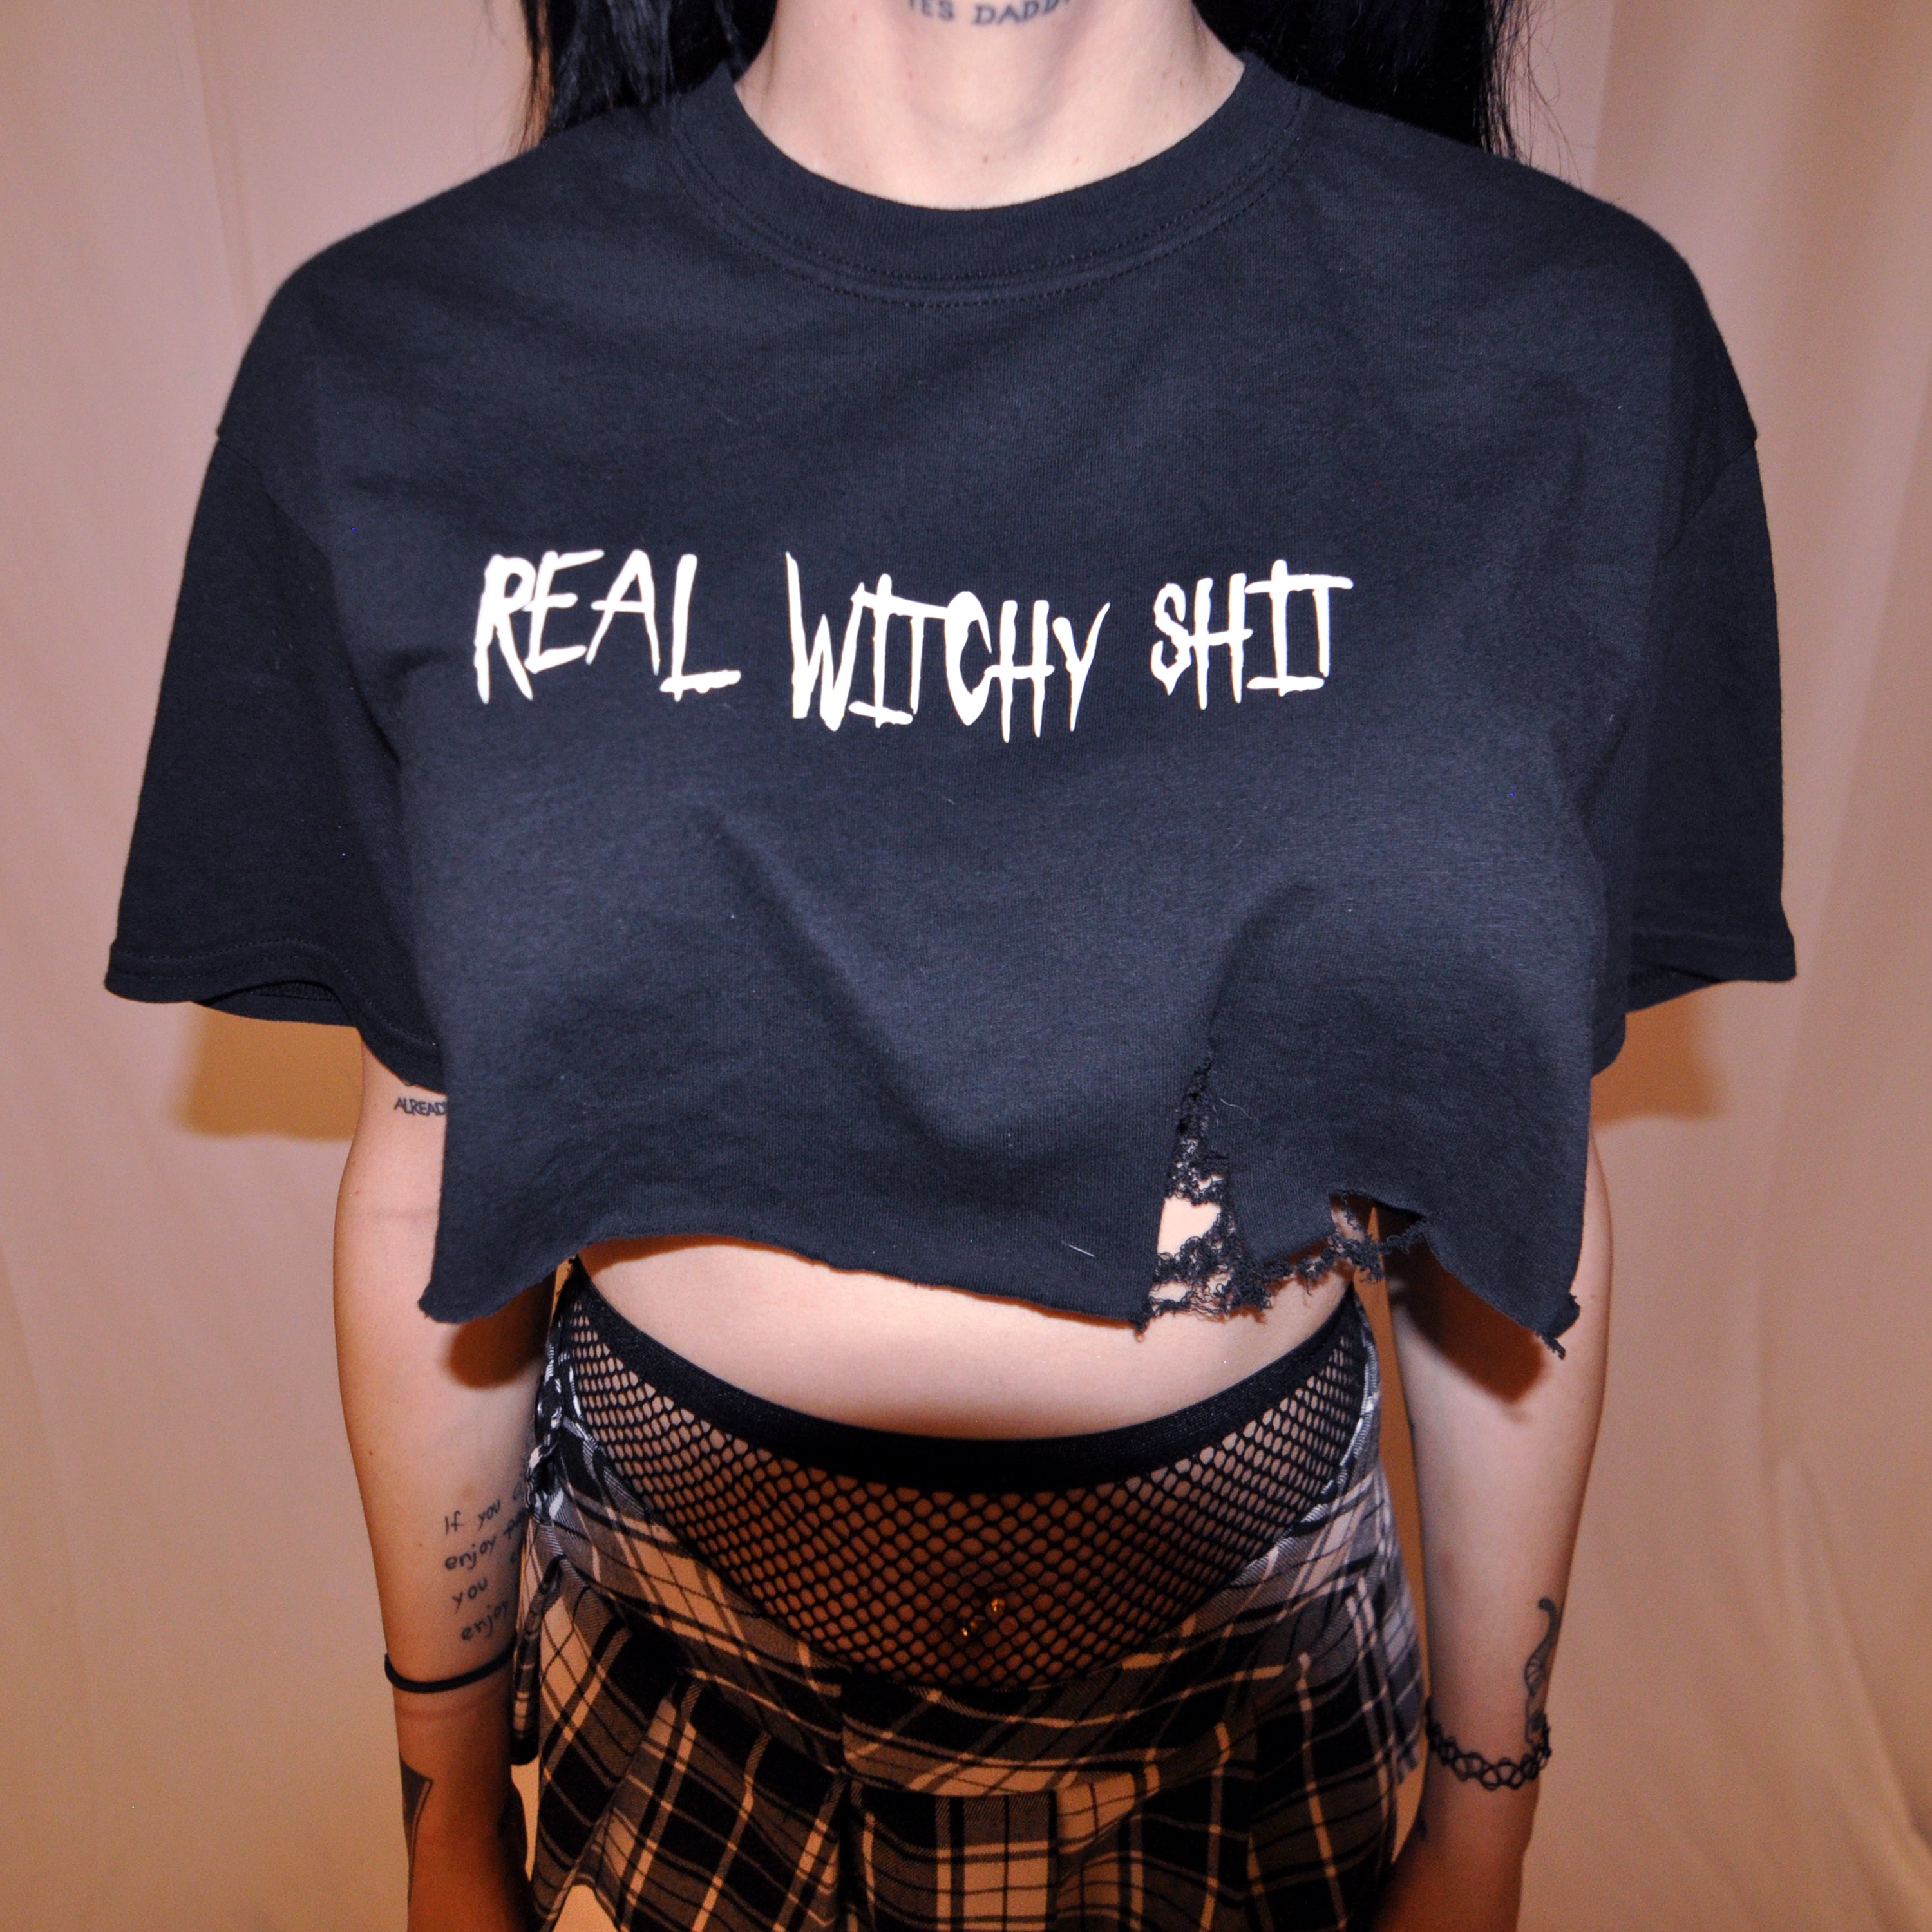 REAL WITCHY SHIT